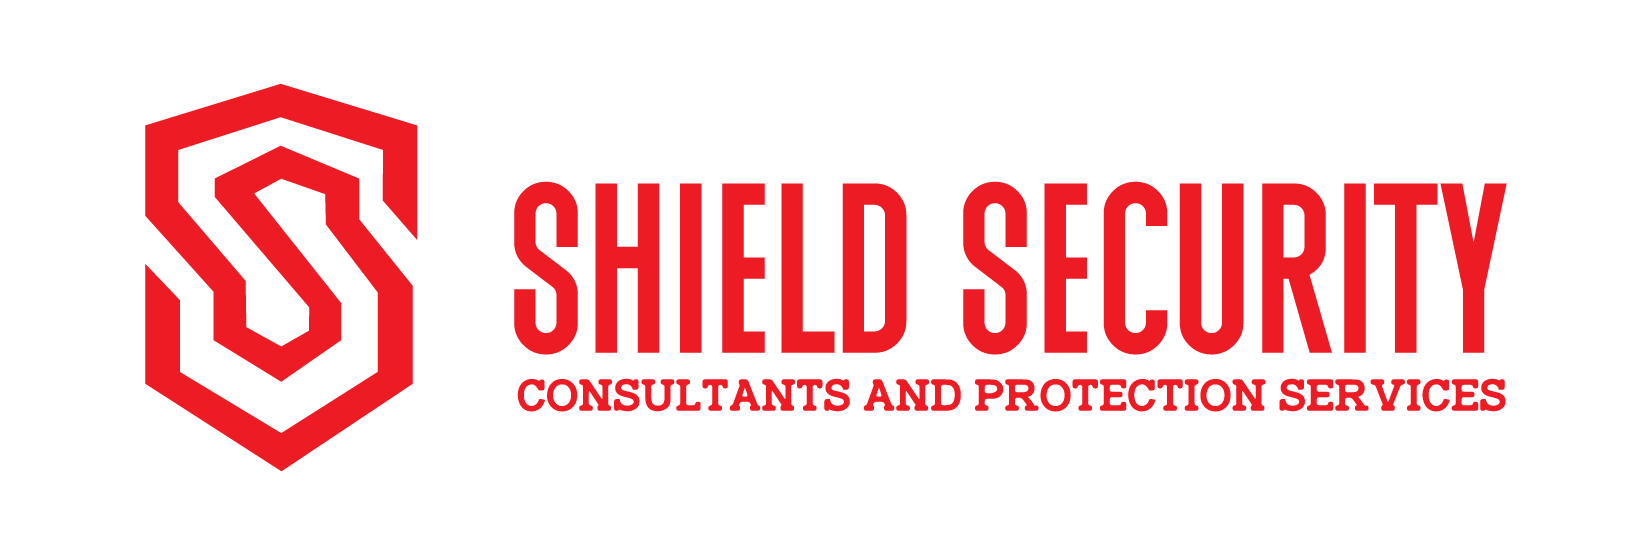 Shield Security 04-05